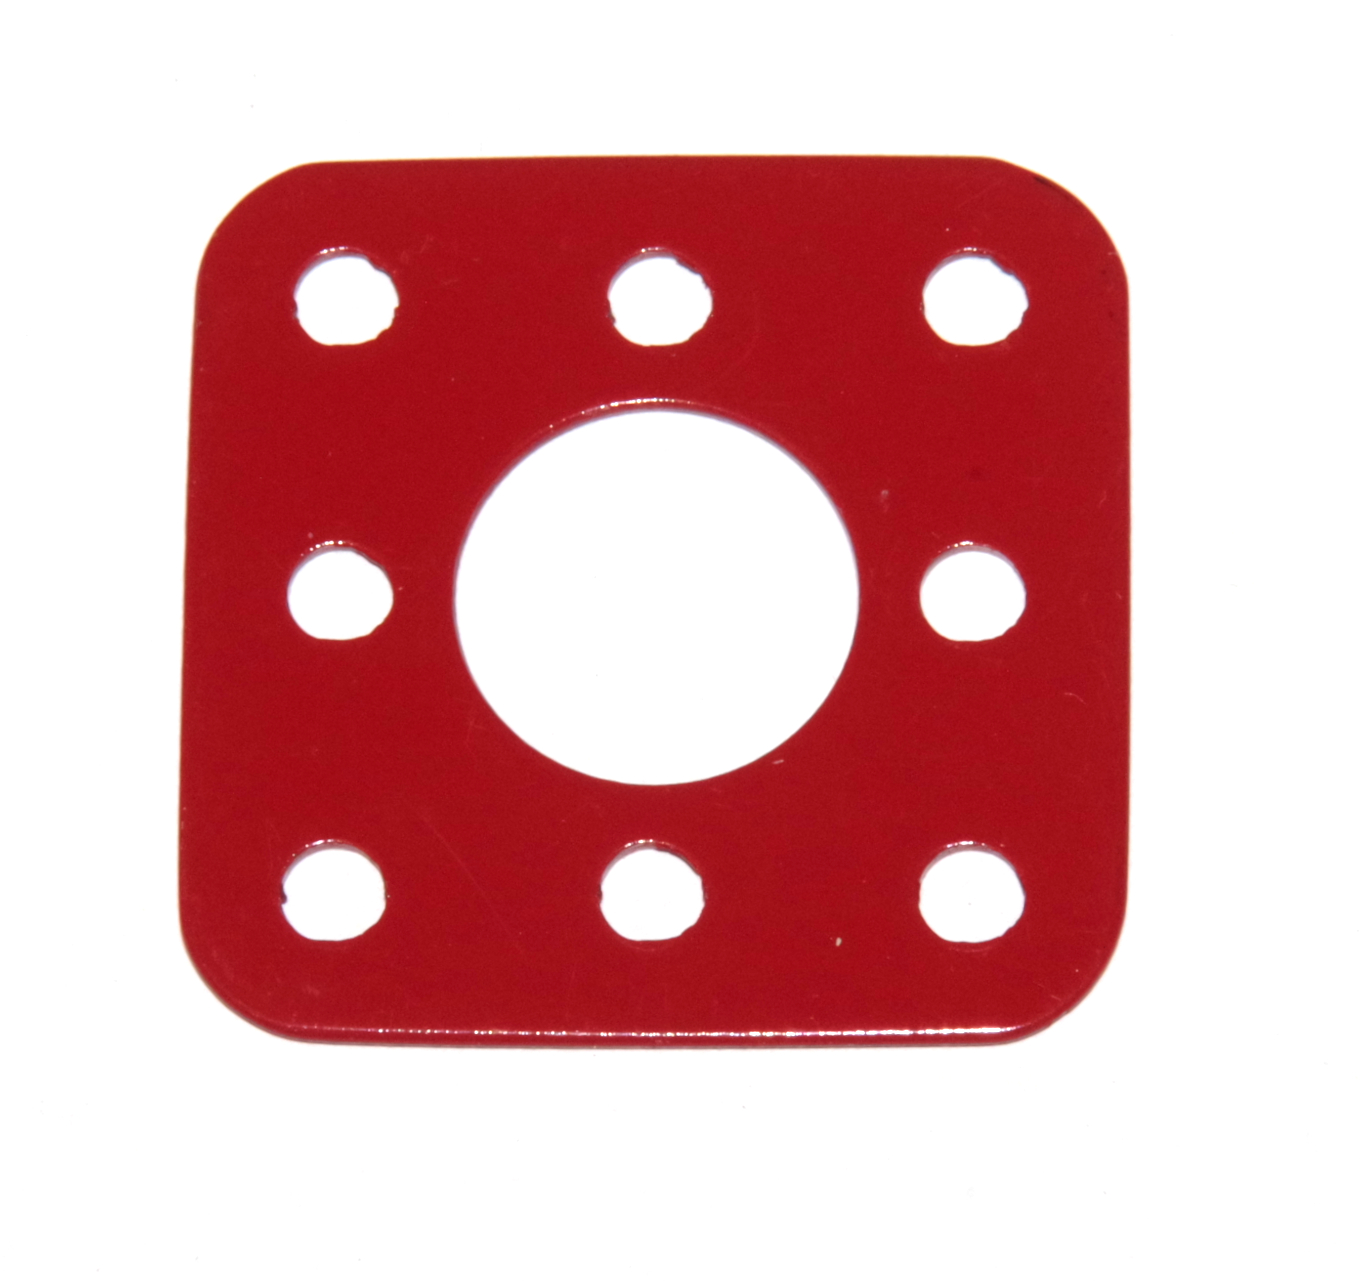 74y Flat Plate 3x3 Hole Red